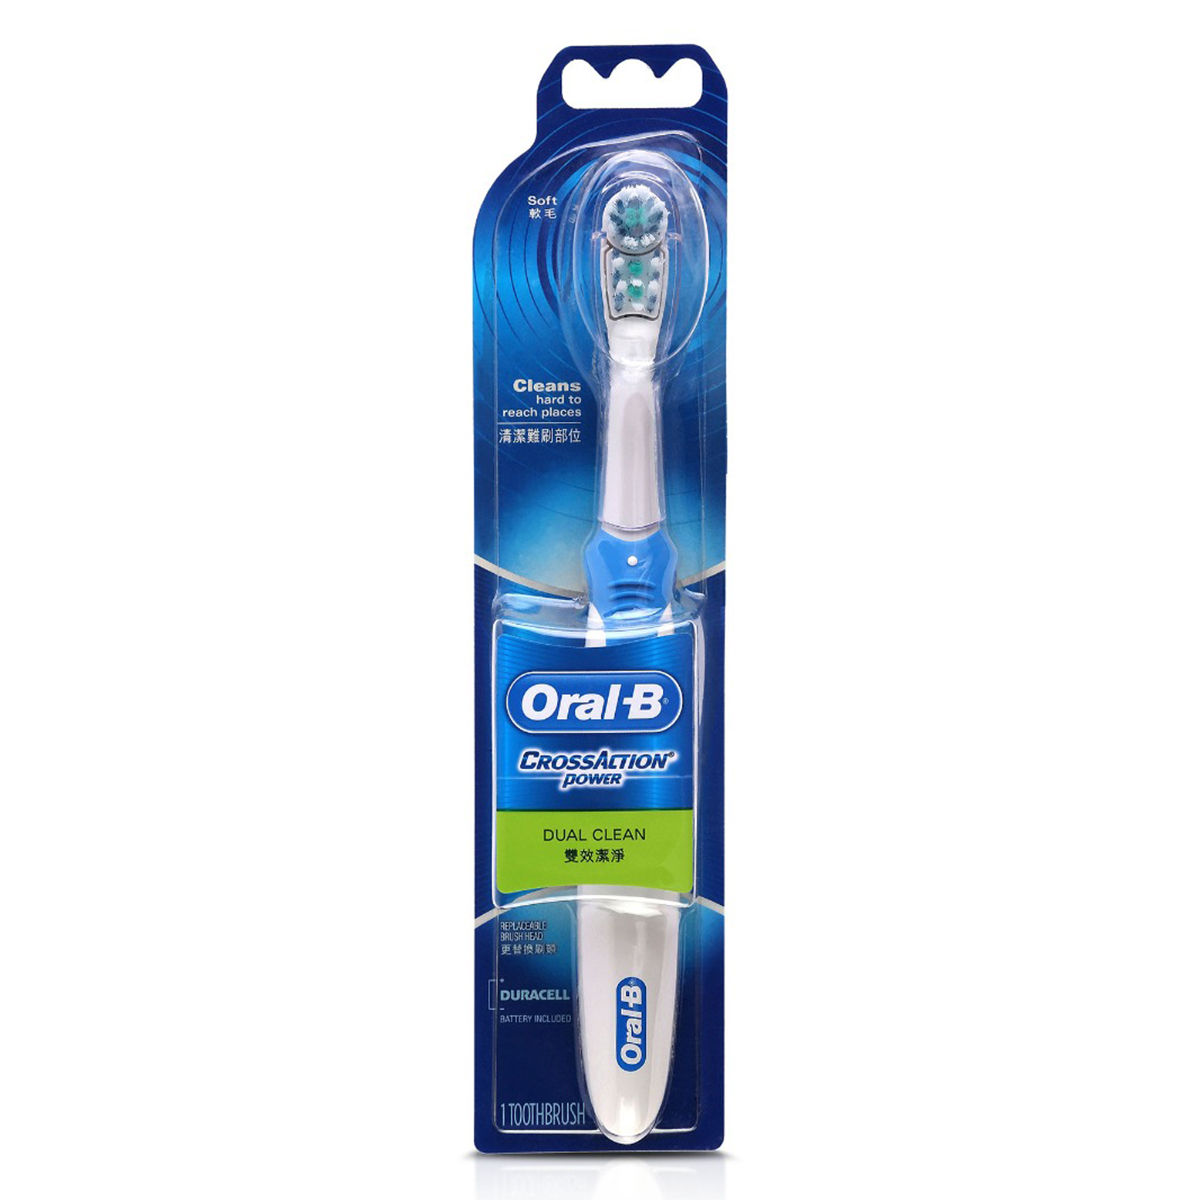 Buy Oral-B Cross Action Power Toothbrush, 1 Count Online